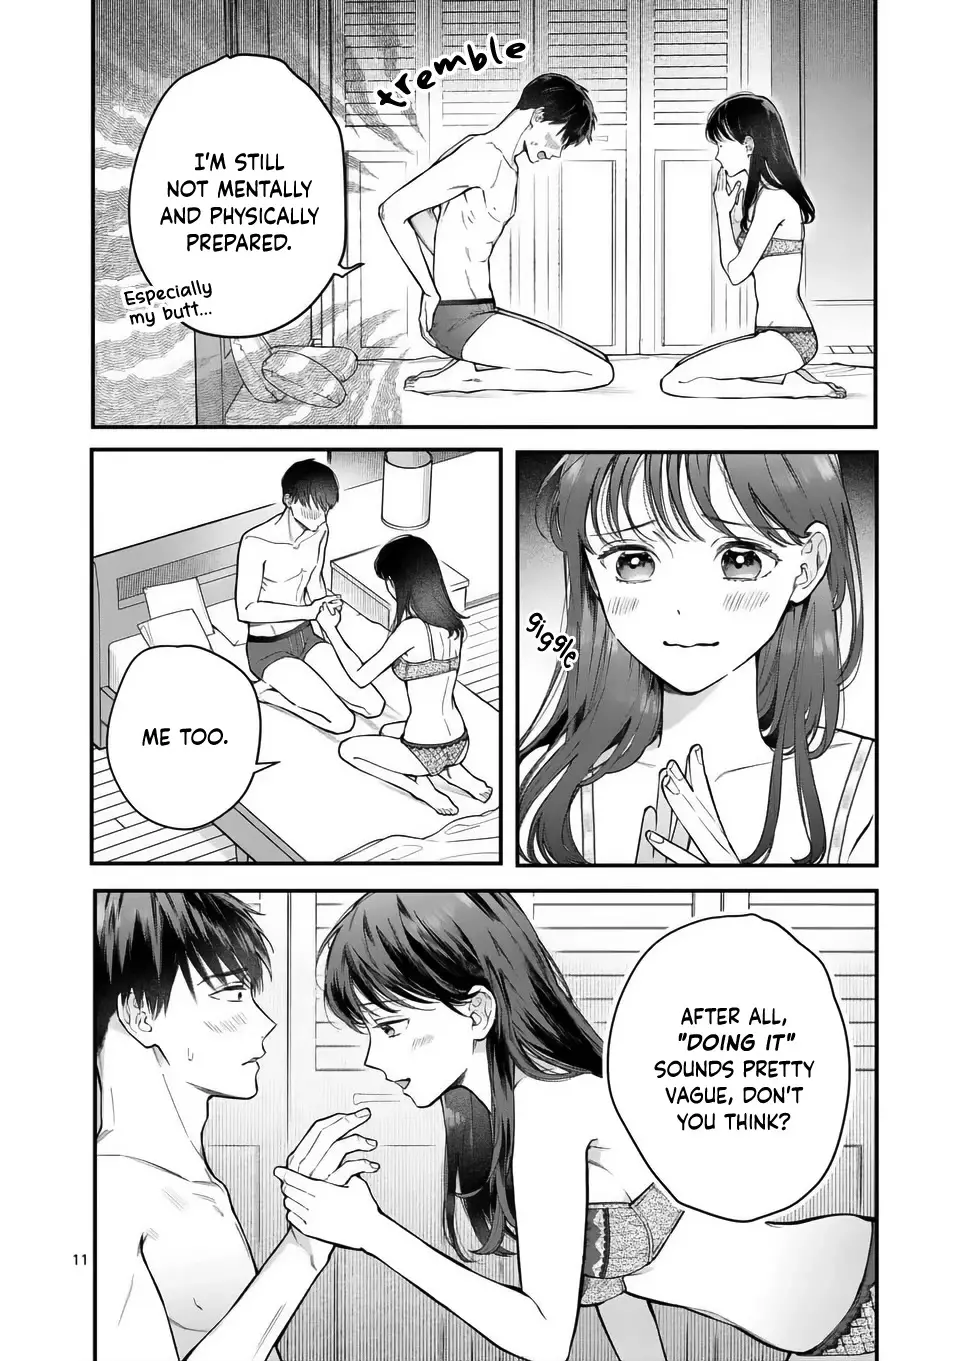 Is It Wrong To Get Done By A Girl? - 11 page 12